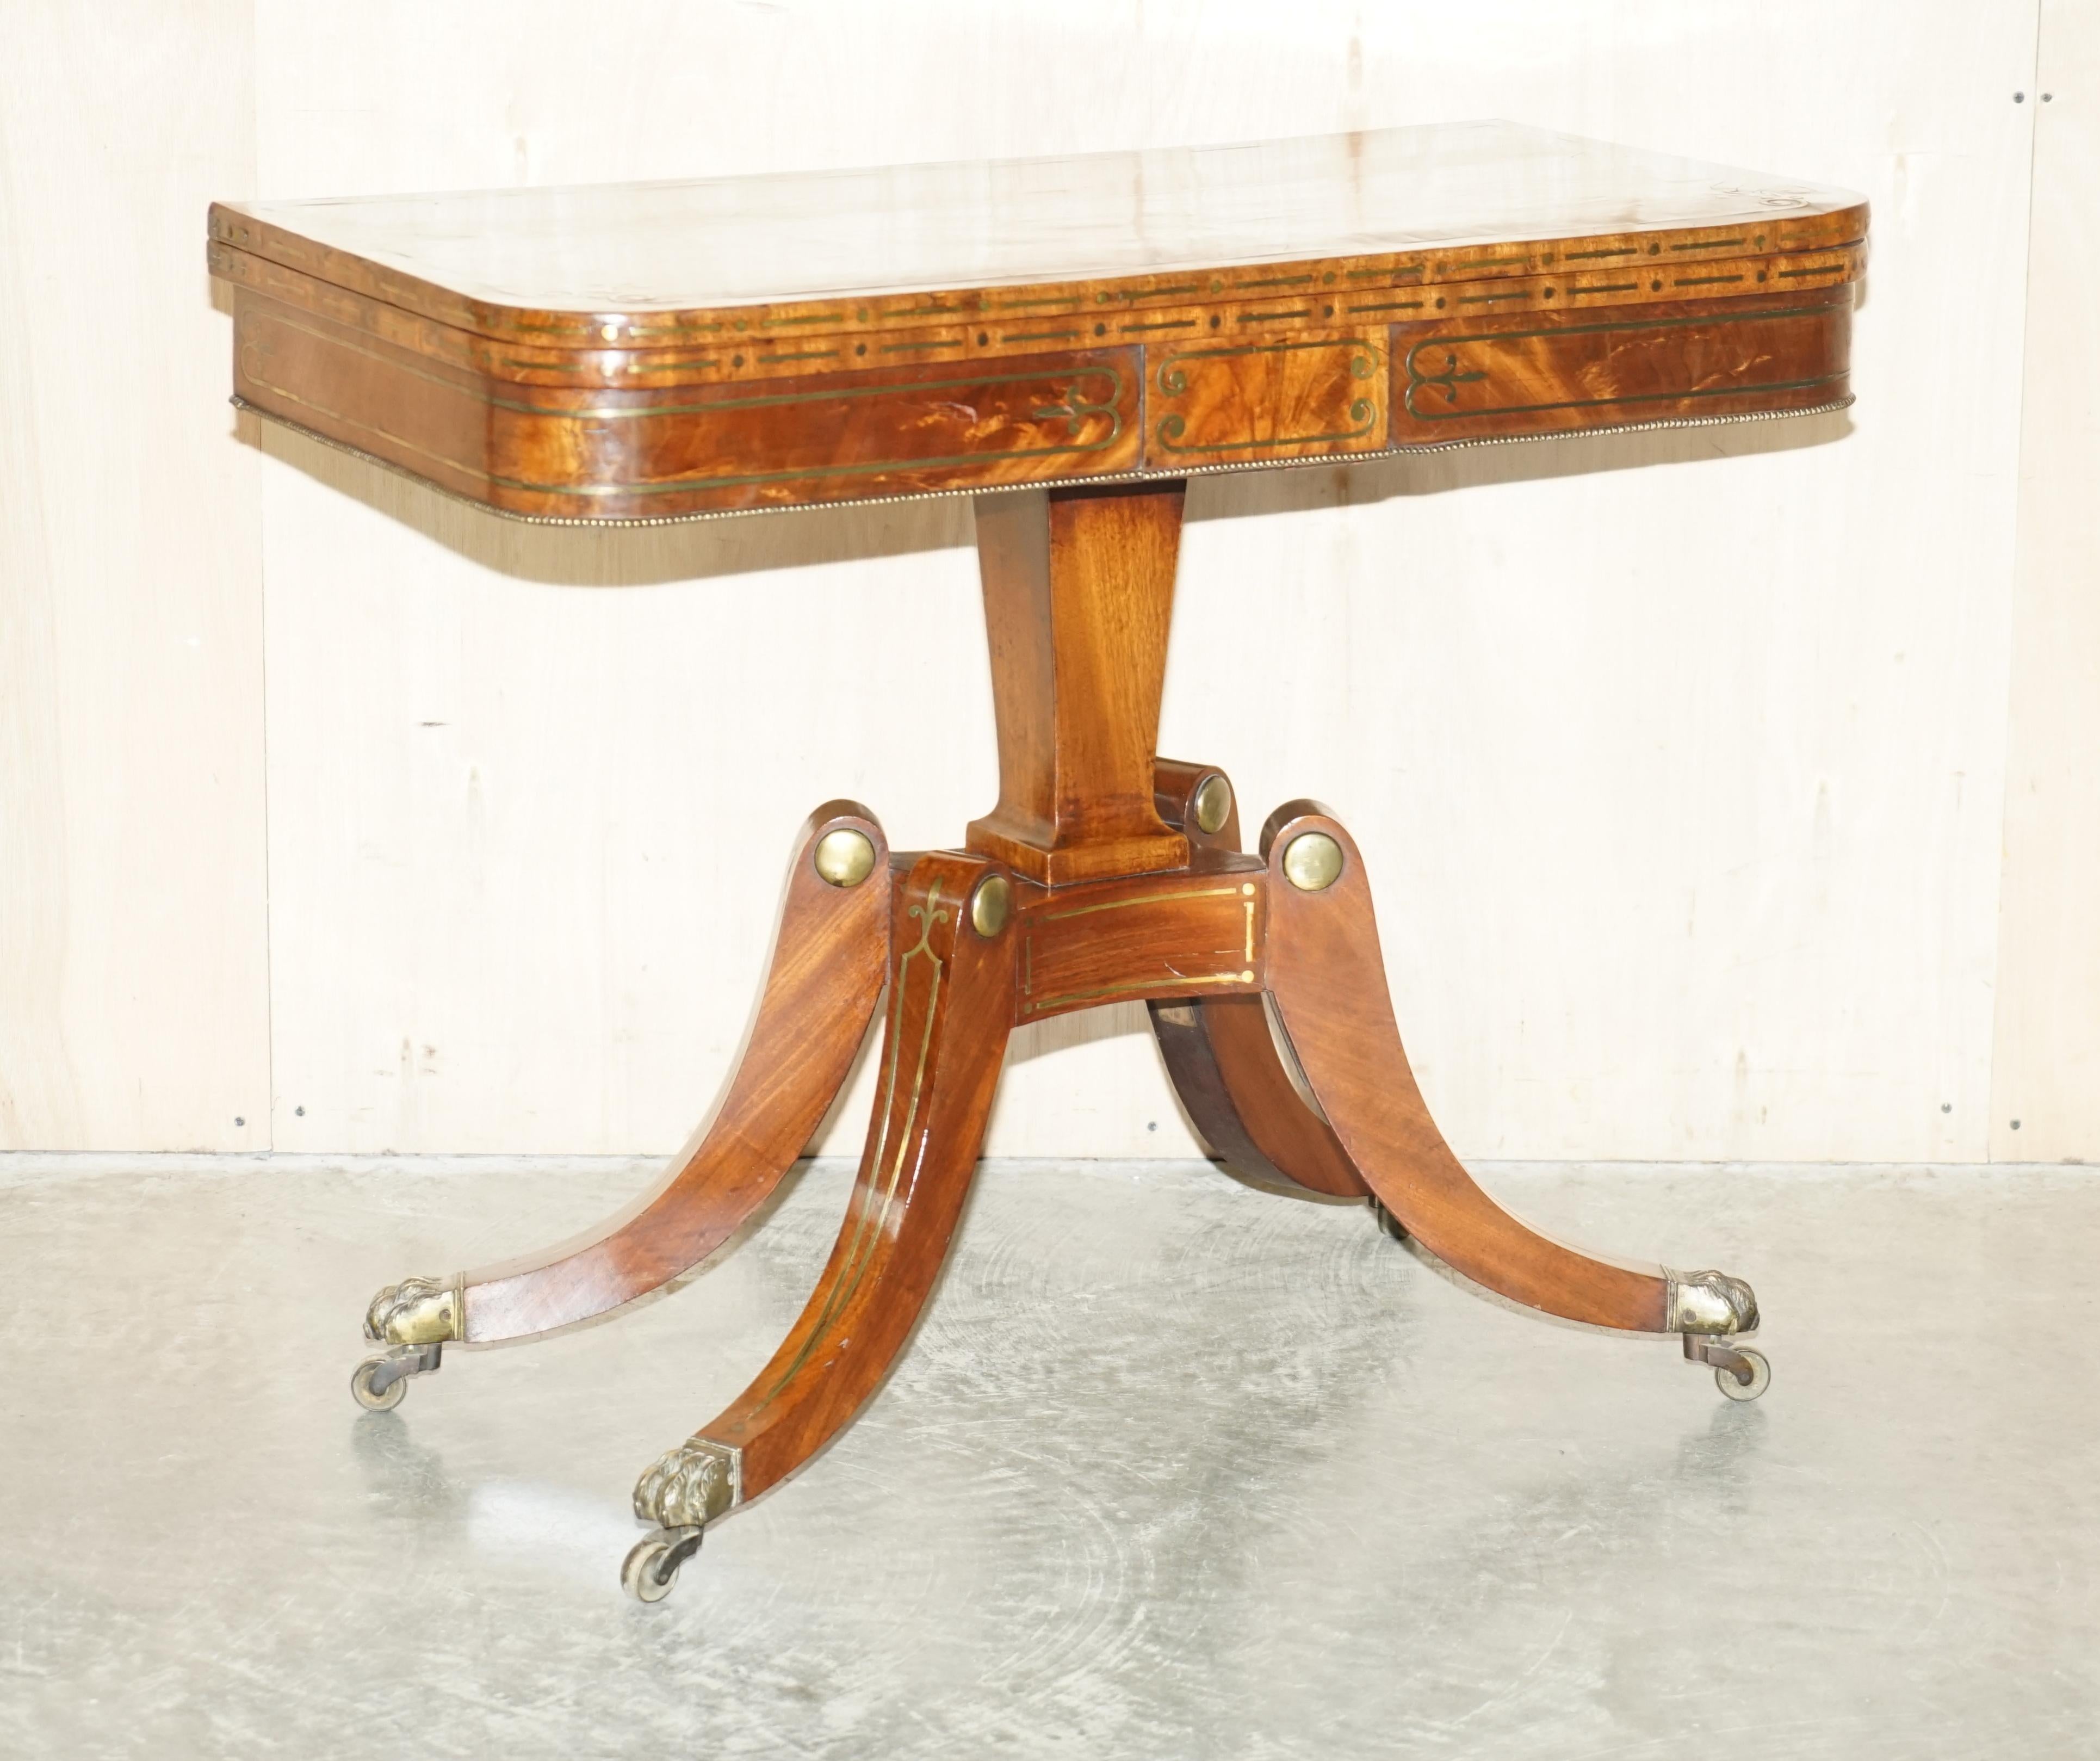 Royal House Antiques

Royal House Antiques is delighted to offer for sale this exquisite, fully restored, hand made in England Regency circa 1815 Mahogany with brass inlay occasional table with baize lined card top inside.

A very rare example,